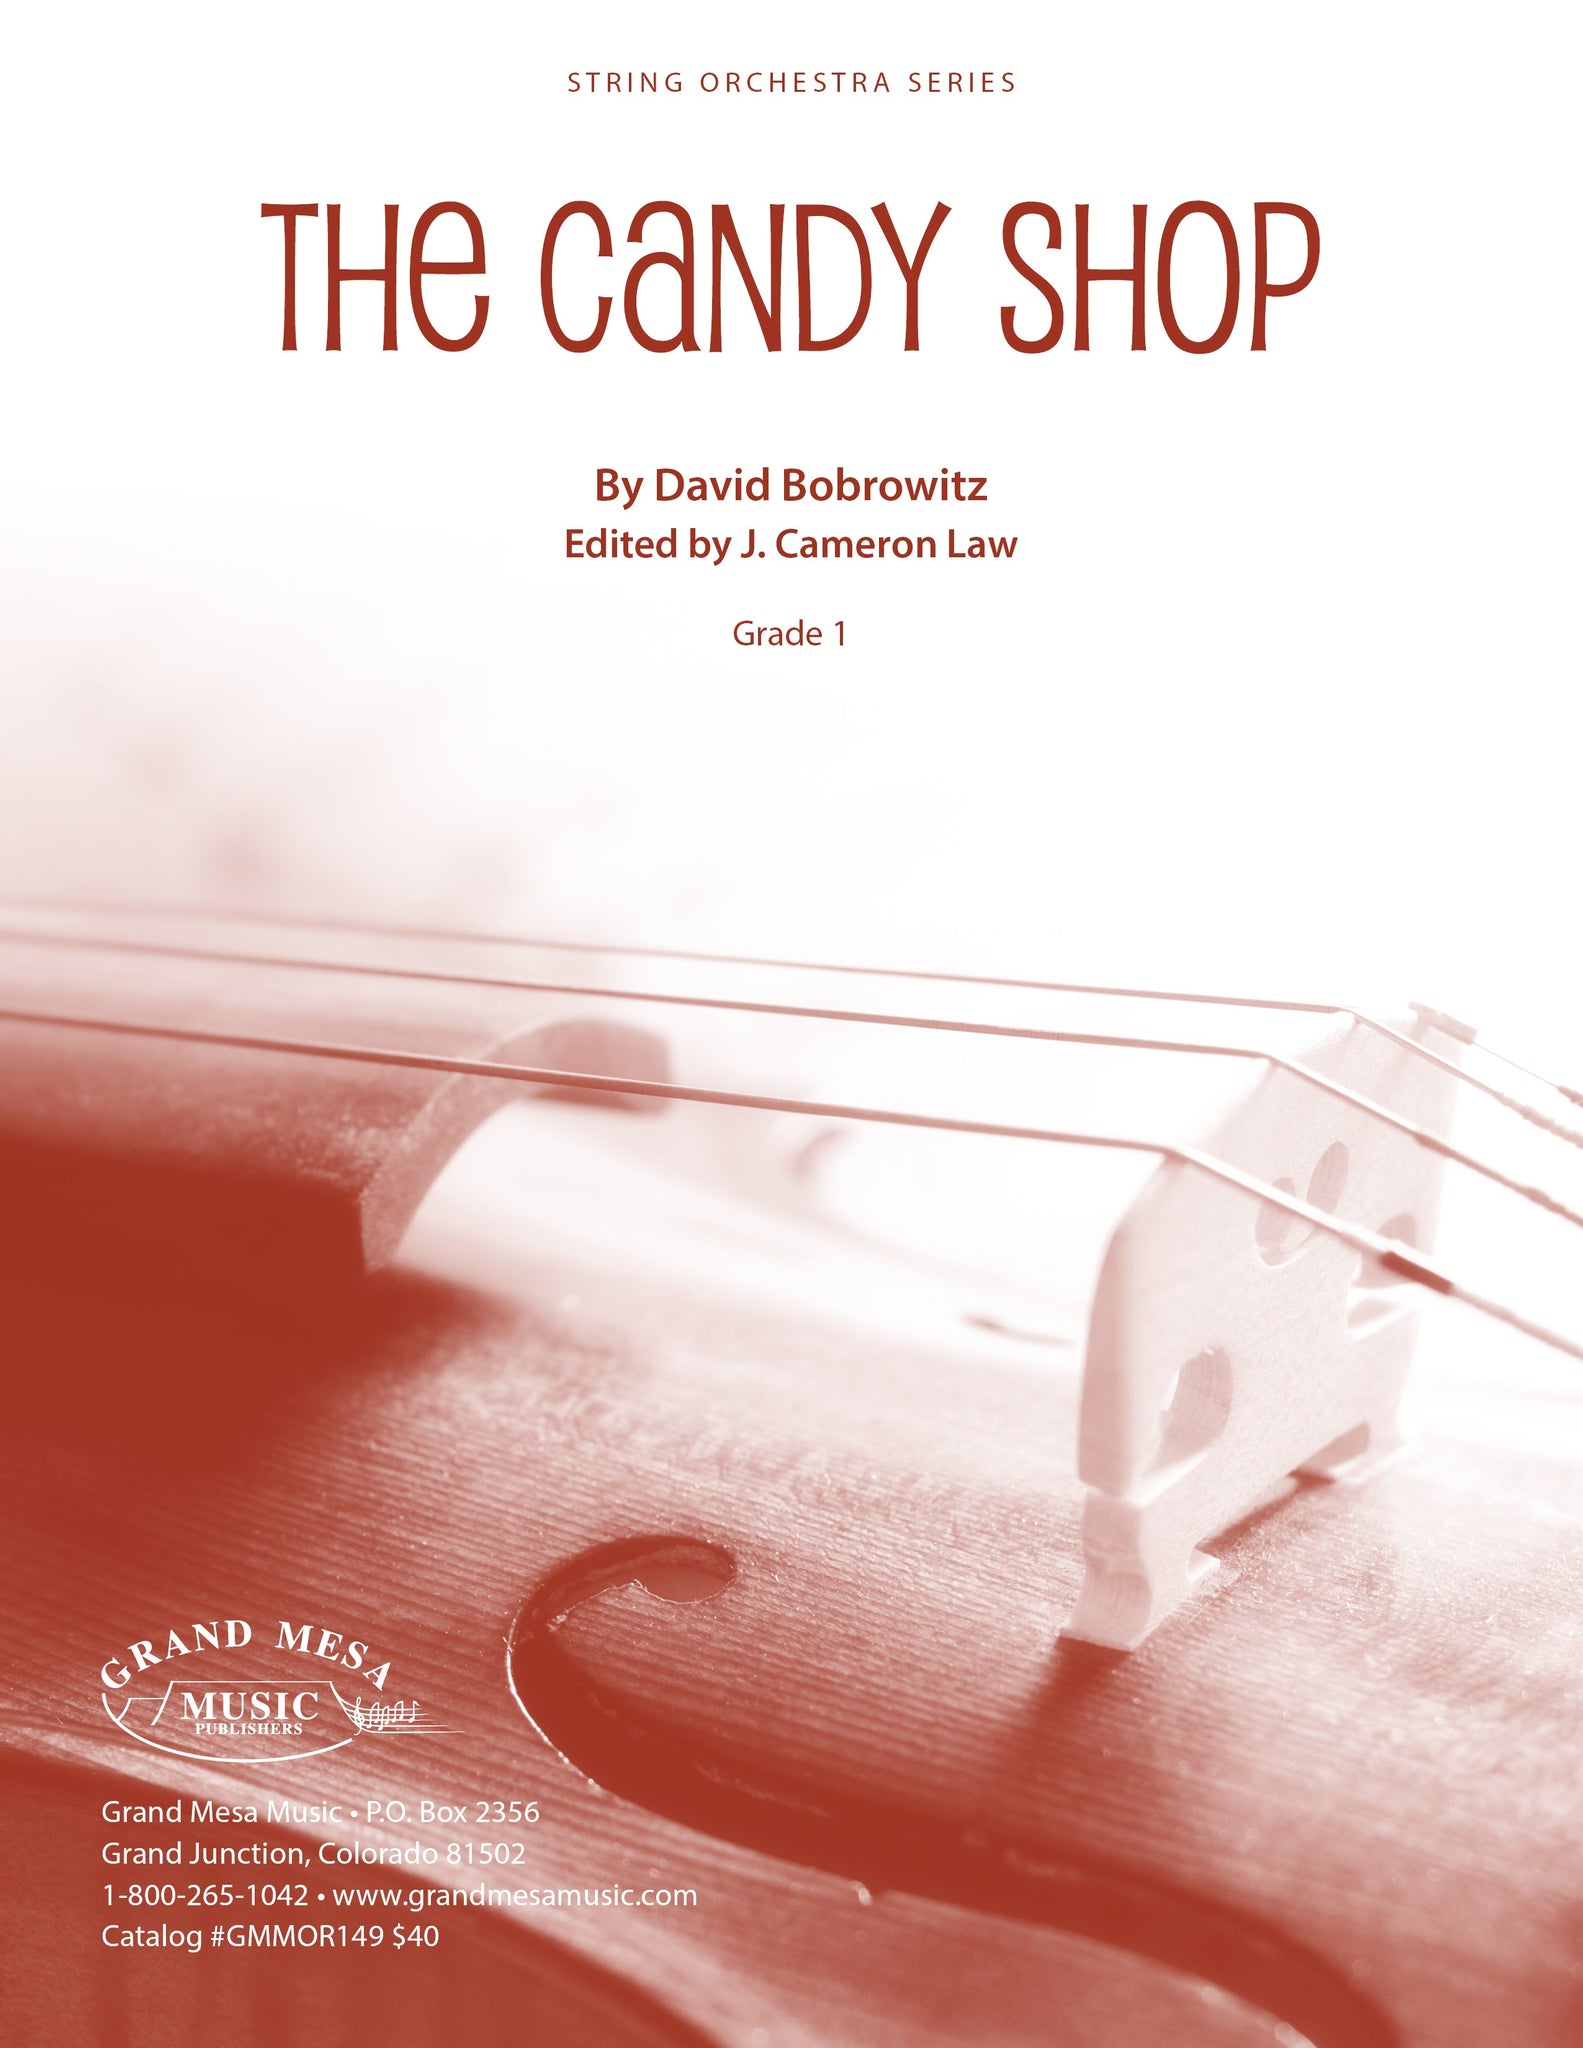 Strings sheet music cover of The Candy Shop, composed by David Bobrowitz.